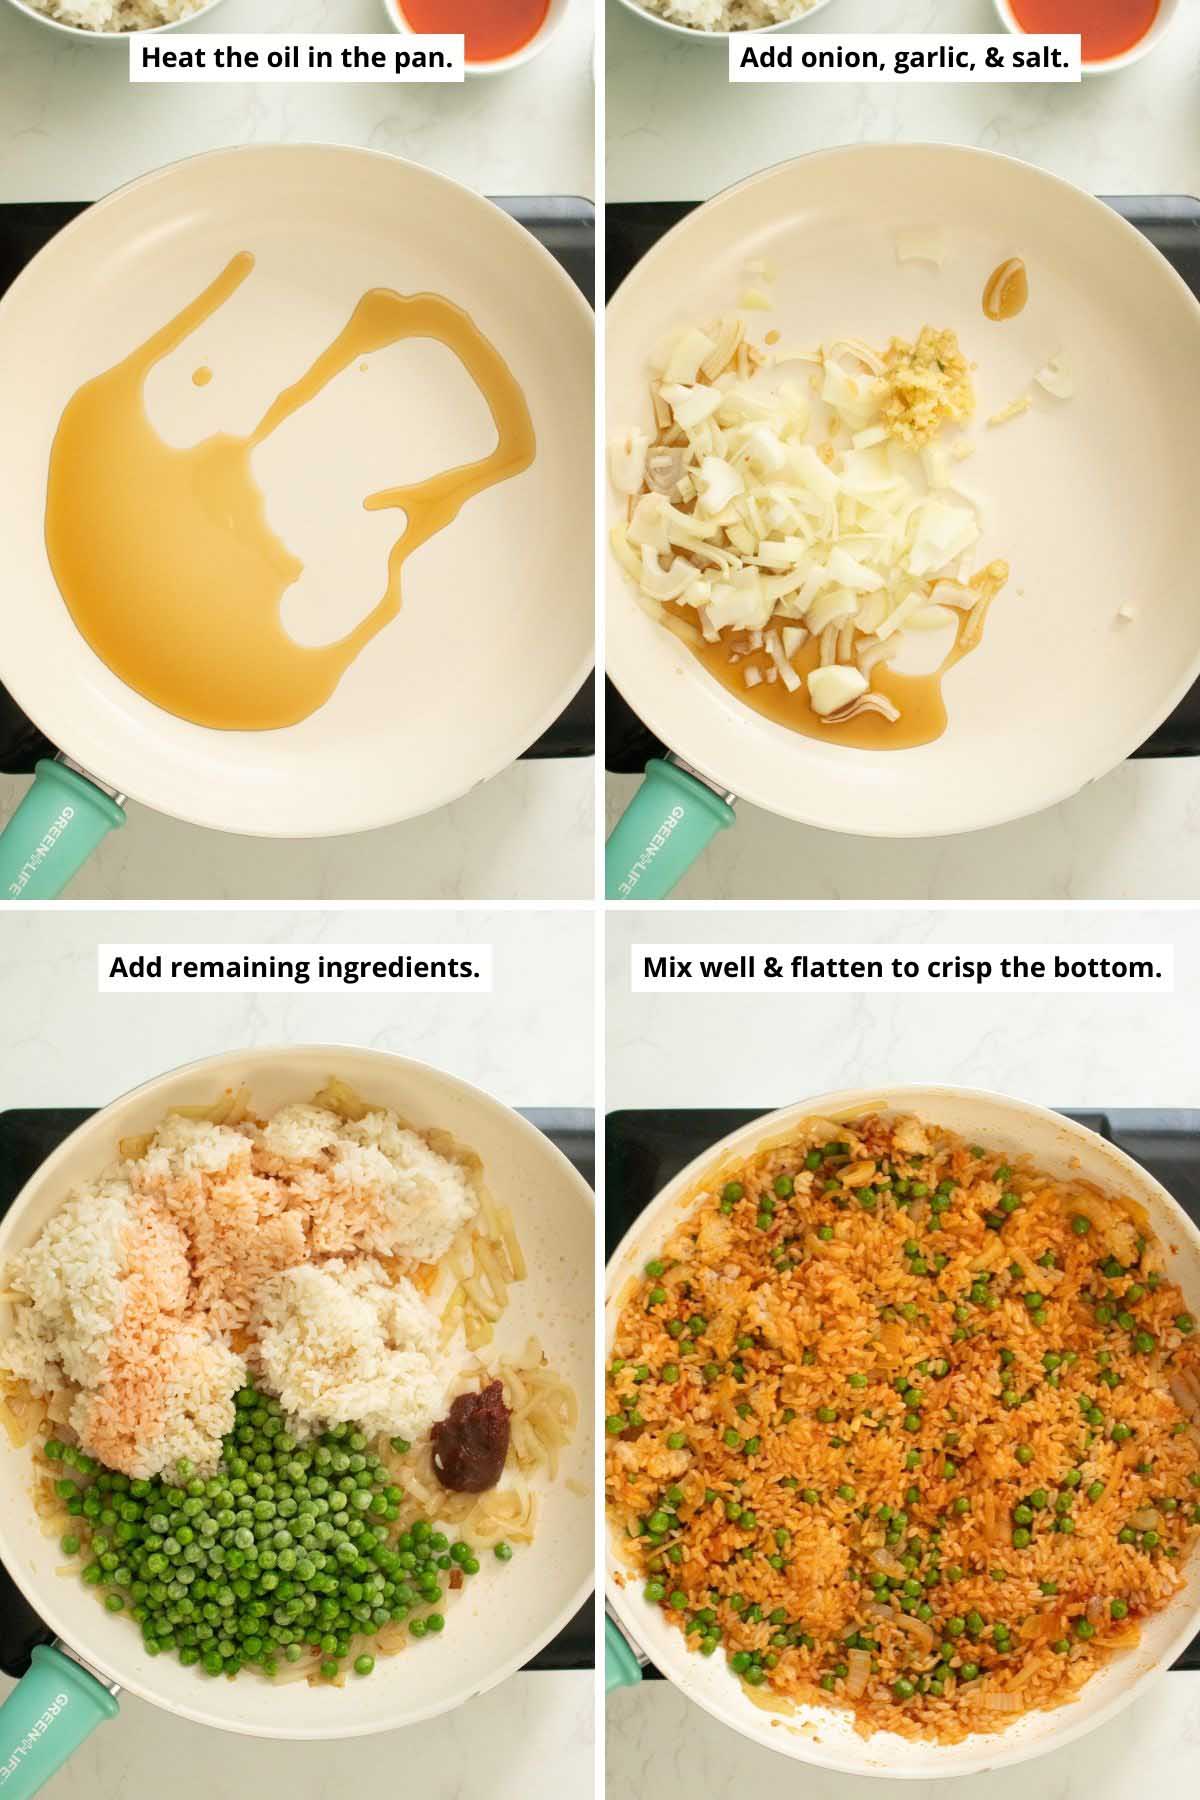 image collage showing the heated oil, adding the garlic and onion, adding the remaining ingredients before and after mixing and spreading the rice out